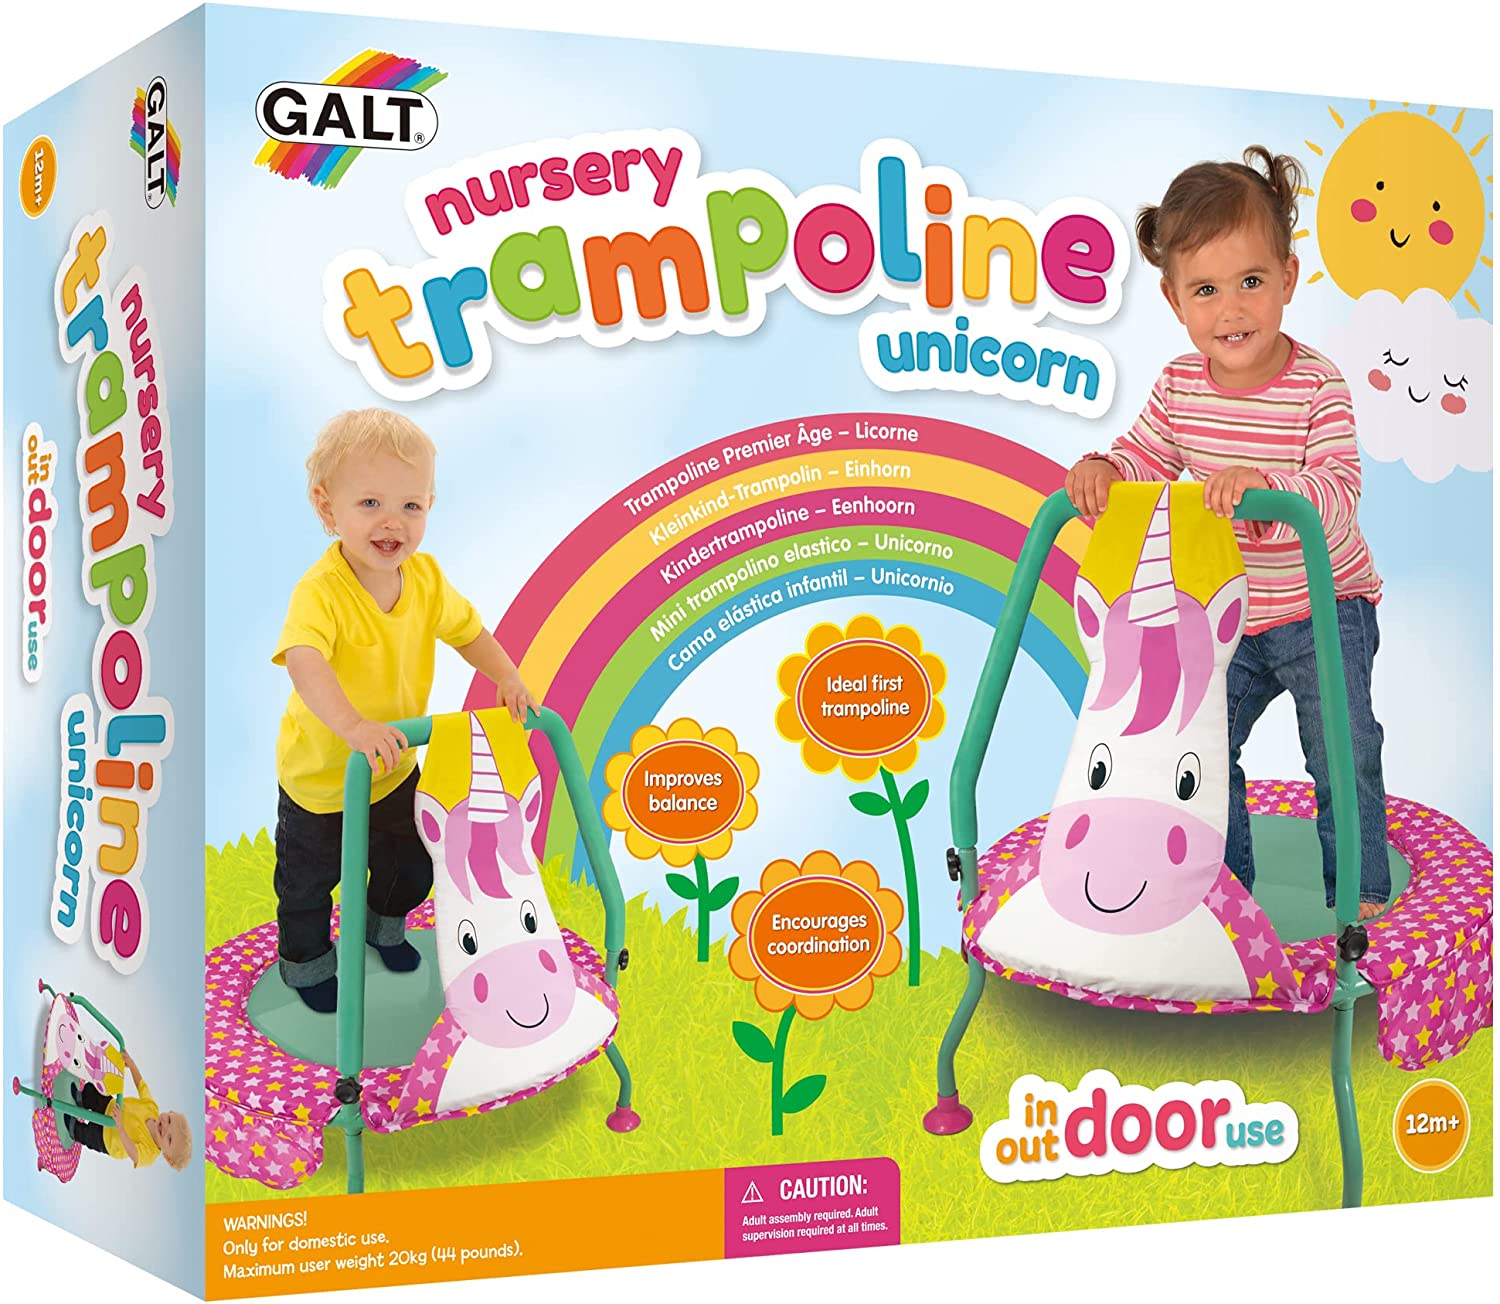 Galt Toys, Nursery Trampoline - Unicorn, Trampolines for Kids, Ages 1 Year Plus - image 4 of 7